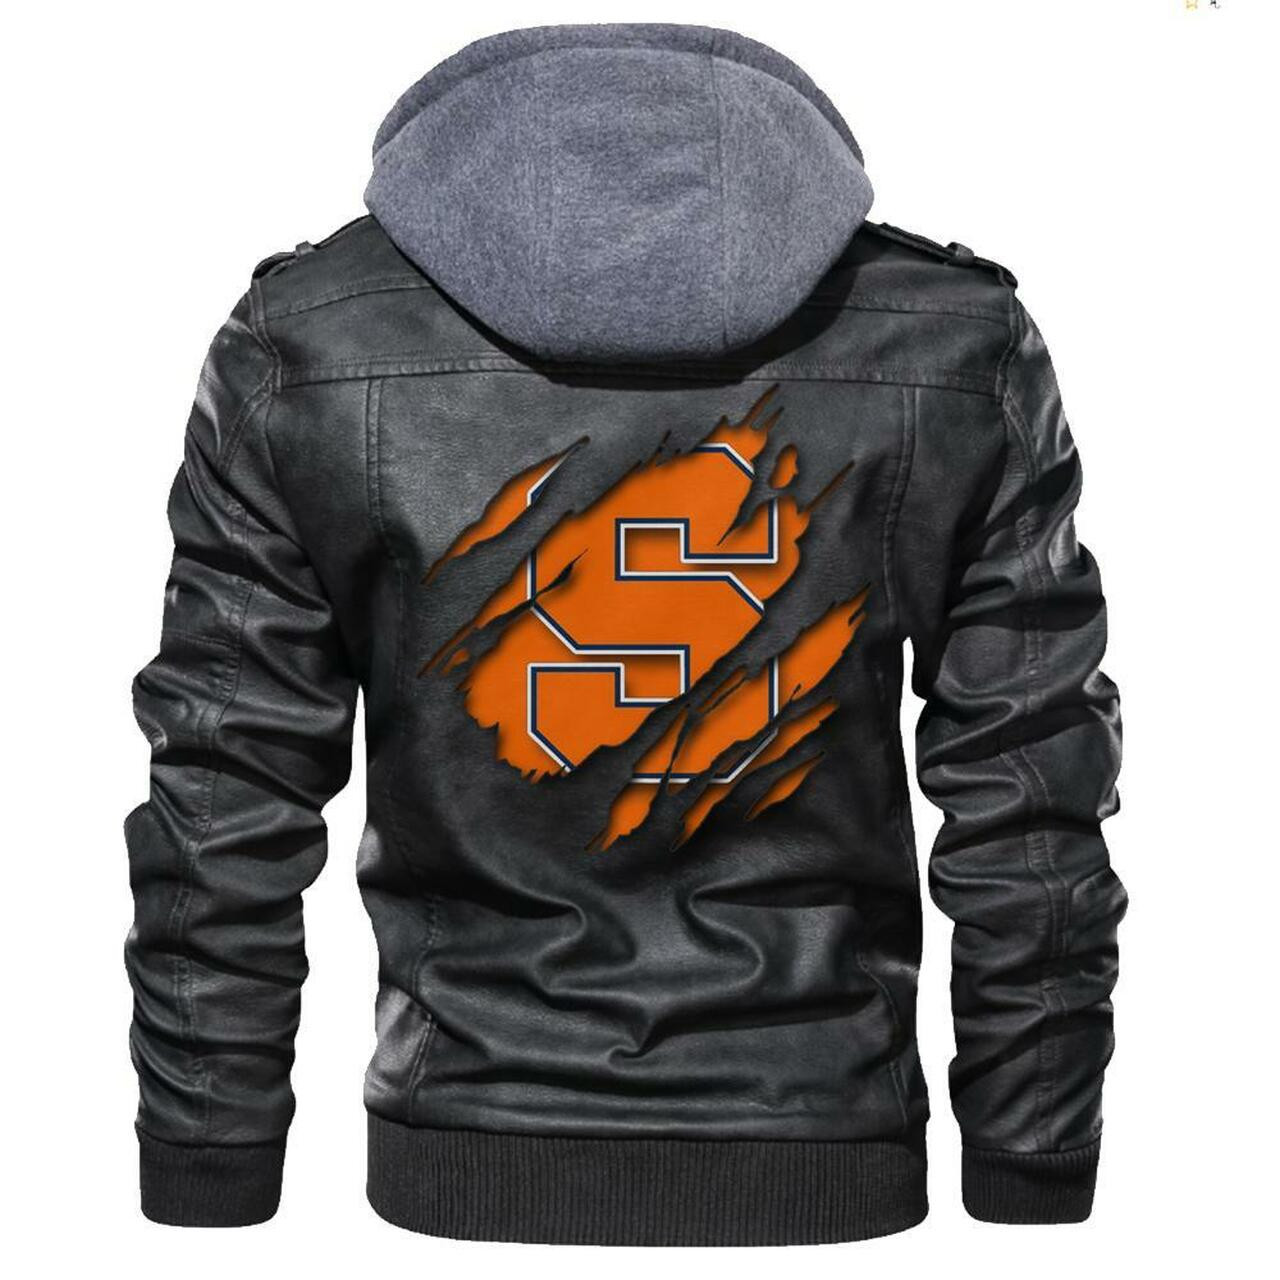 You can find Leather Jacket online at a great price 10